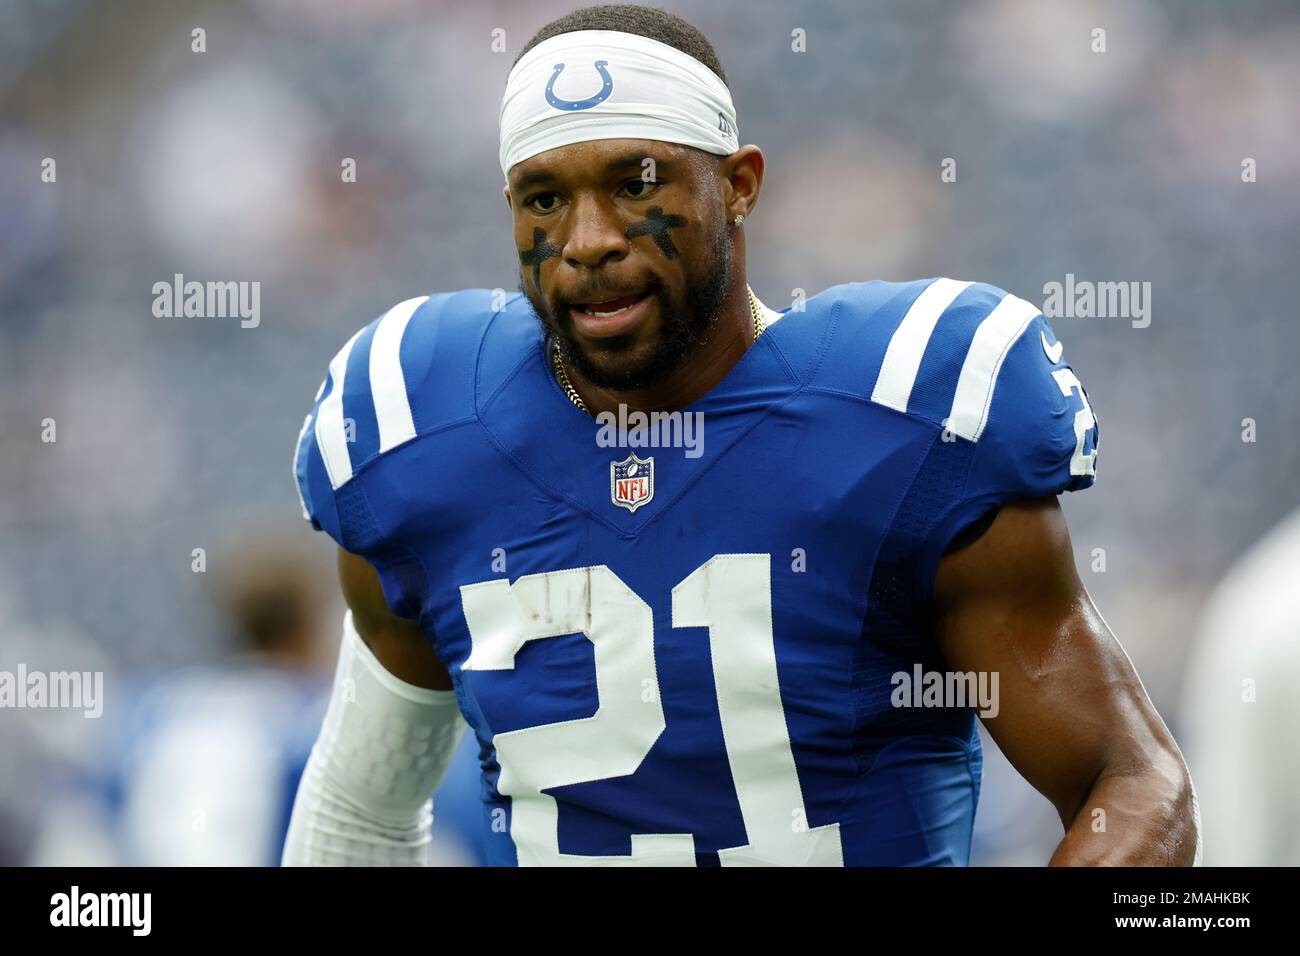 Indianapolis Colts running back Nyheim Hines (21) during pregame warmups  before an NFL football game against the Houston Texans on Sunday, September  11, 2022, in Houston. (AP Photo/Matt Patterson Stock Photo - Alamy